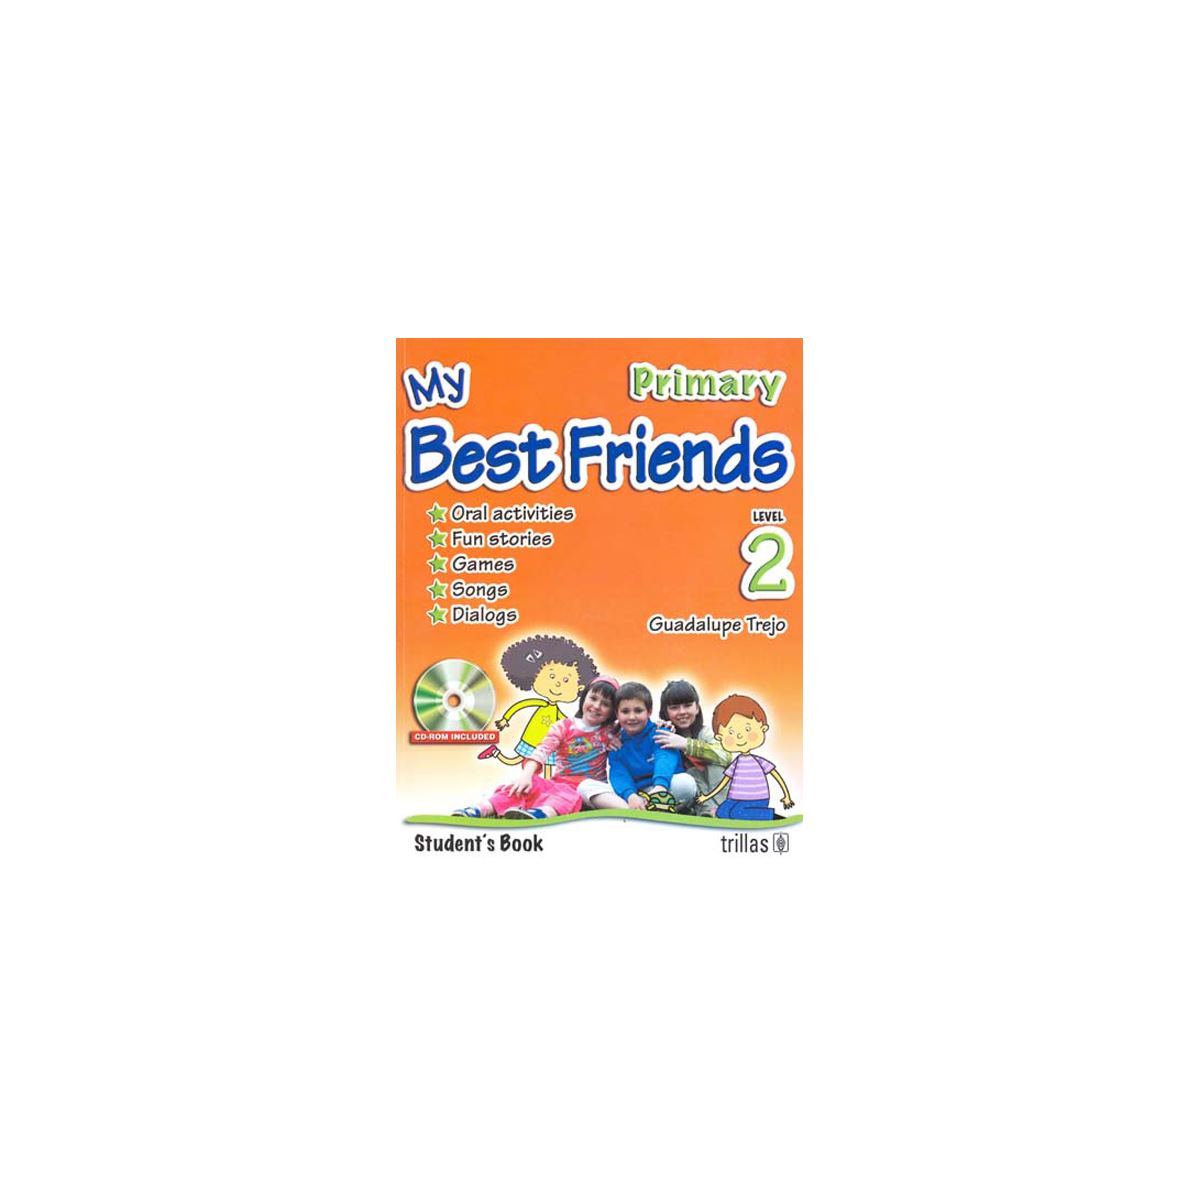 My Best Friends&#58; StudentS Book&#44; Level 2&#44; Primary. Cd&#45;Rom Included